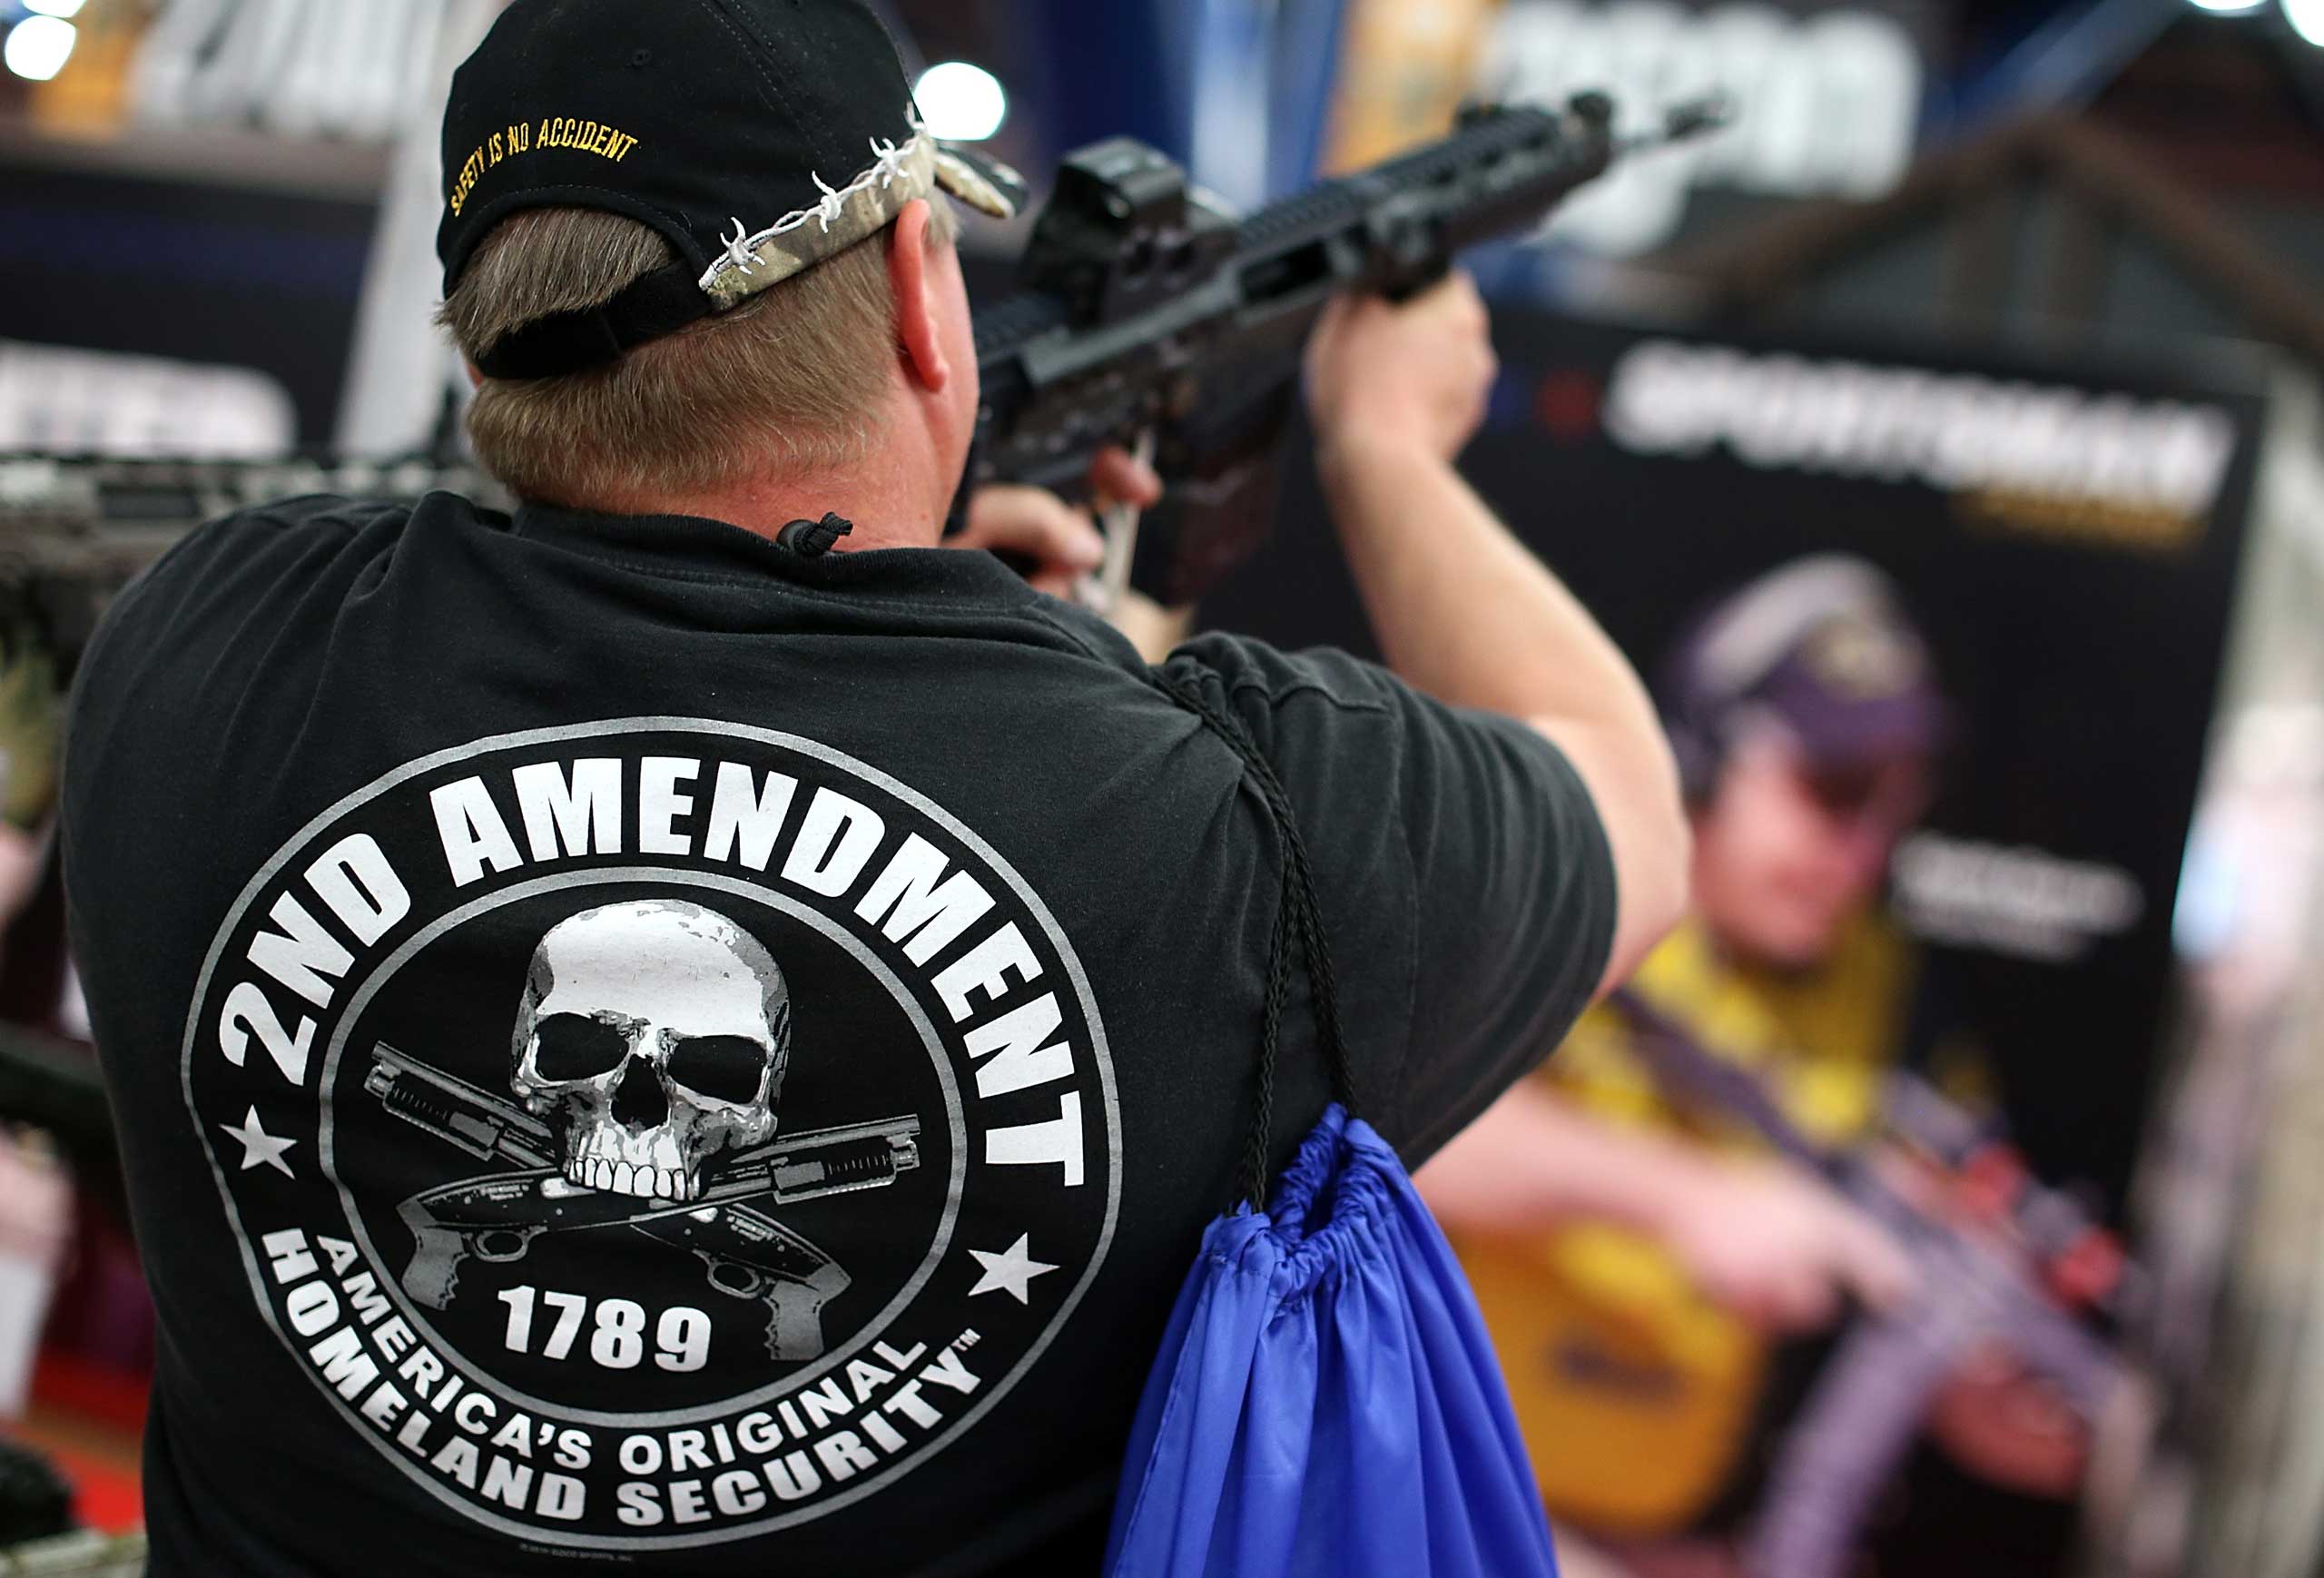 An attendee wears a 2nd amendment shirt while inspecting an assault rifle during the 2013 NRA Annual Meeting and Exhibits at the George R. Brown Convention Center on May 5, 2013 in Houston, Texas. (Justin Sullivan&mdash;Getty Images)